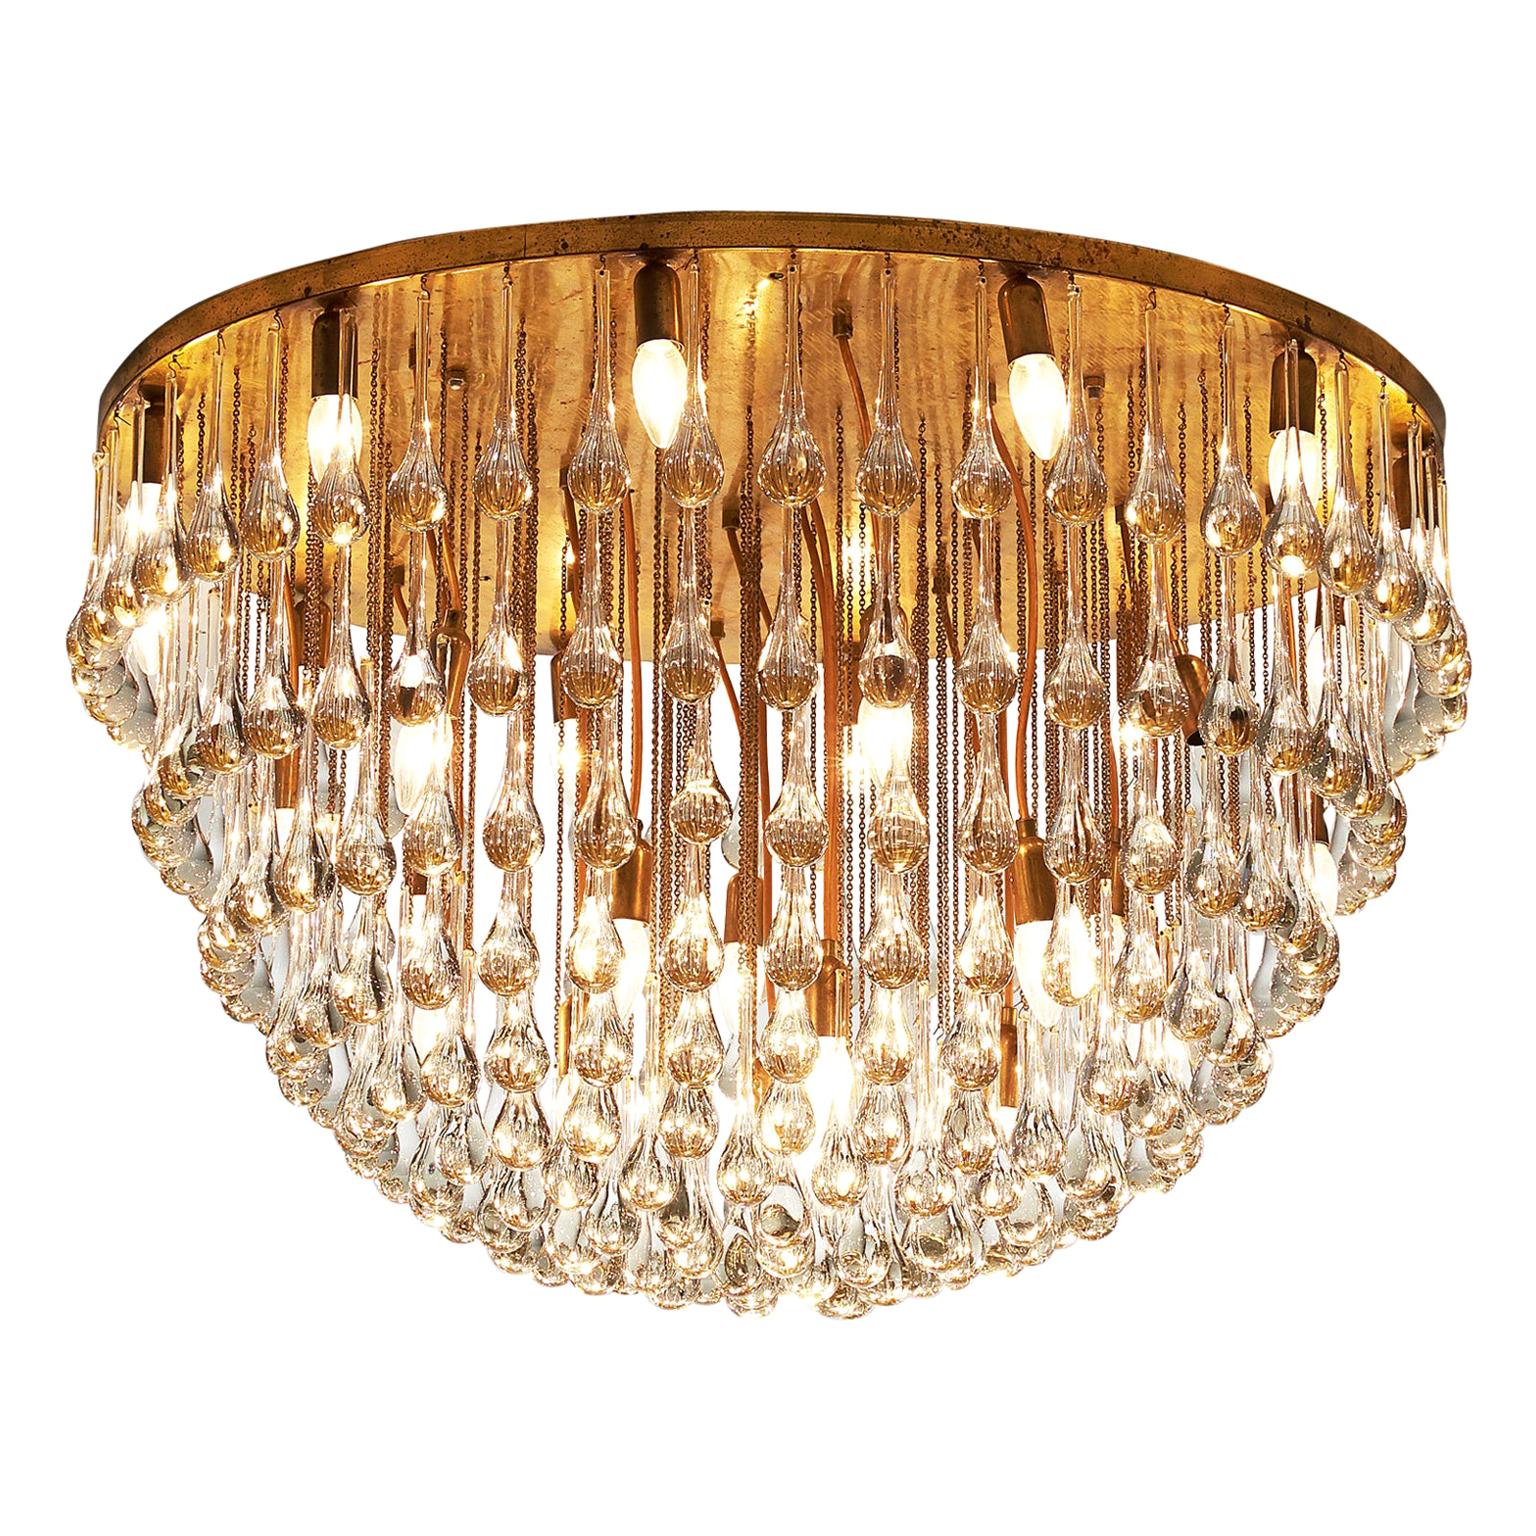 Venini Large Chandelier in Brass with Glass Drops